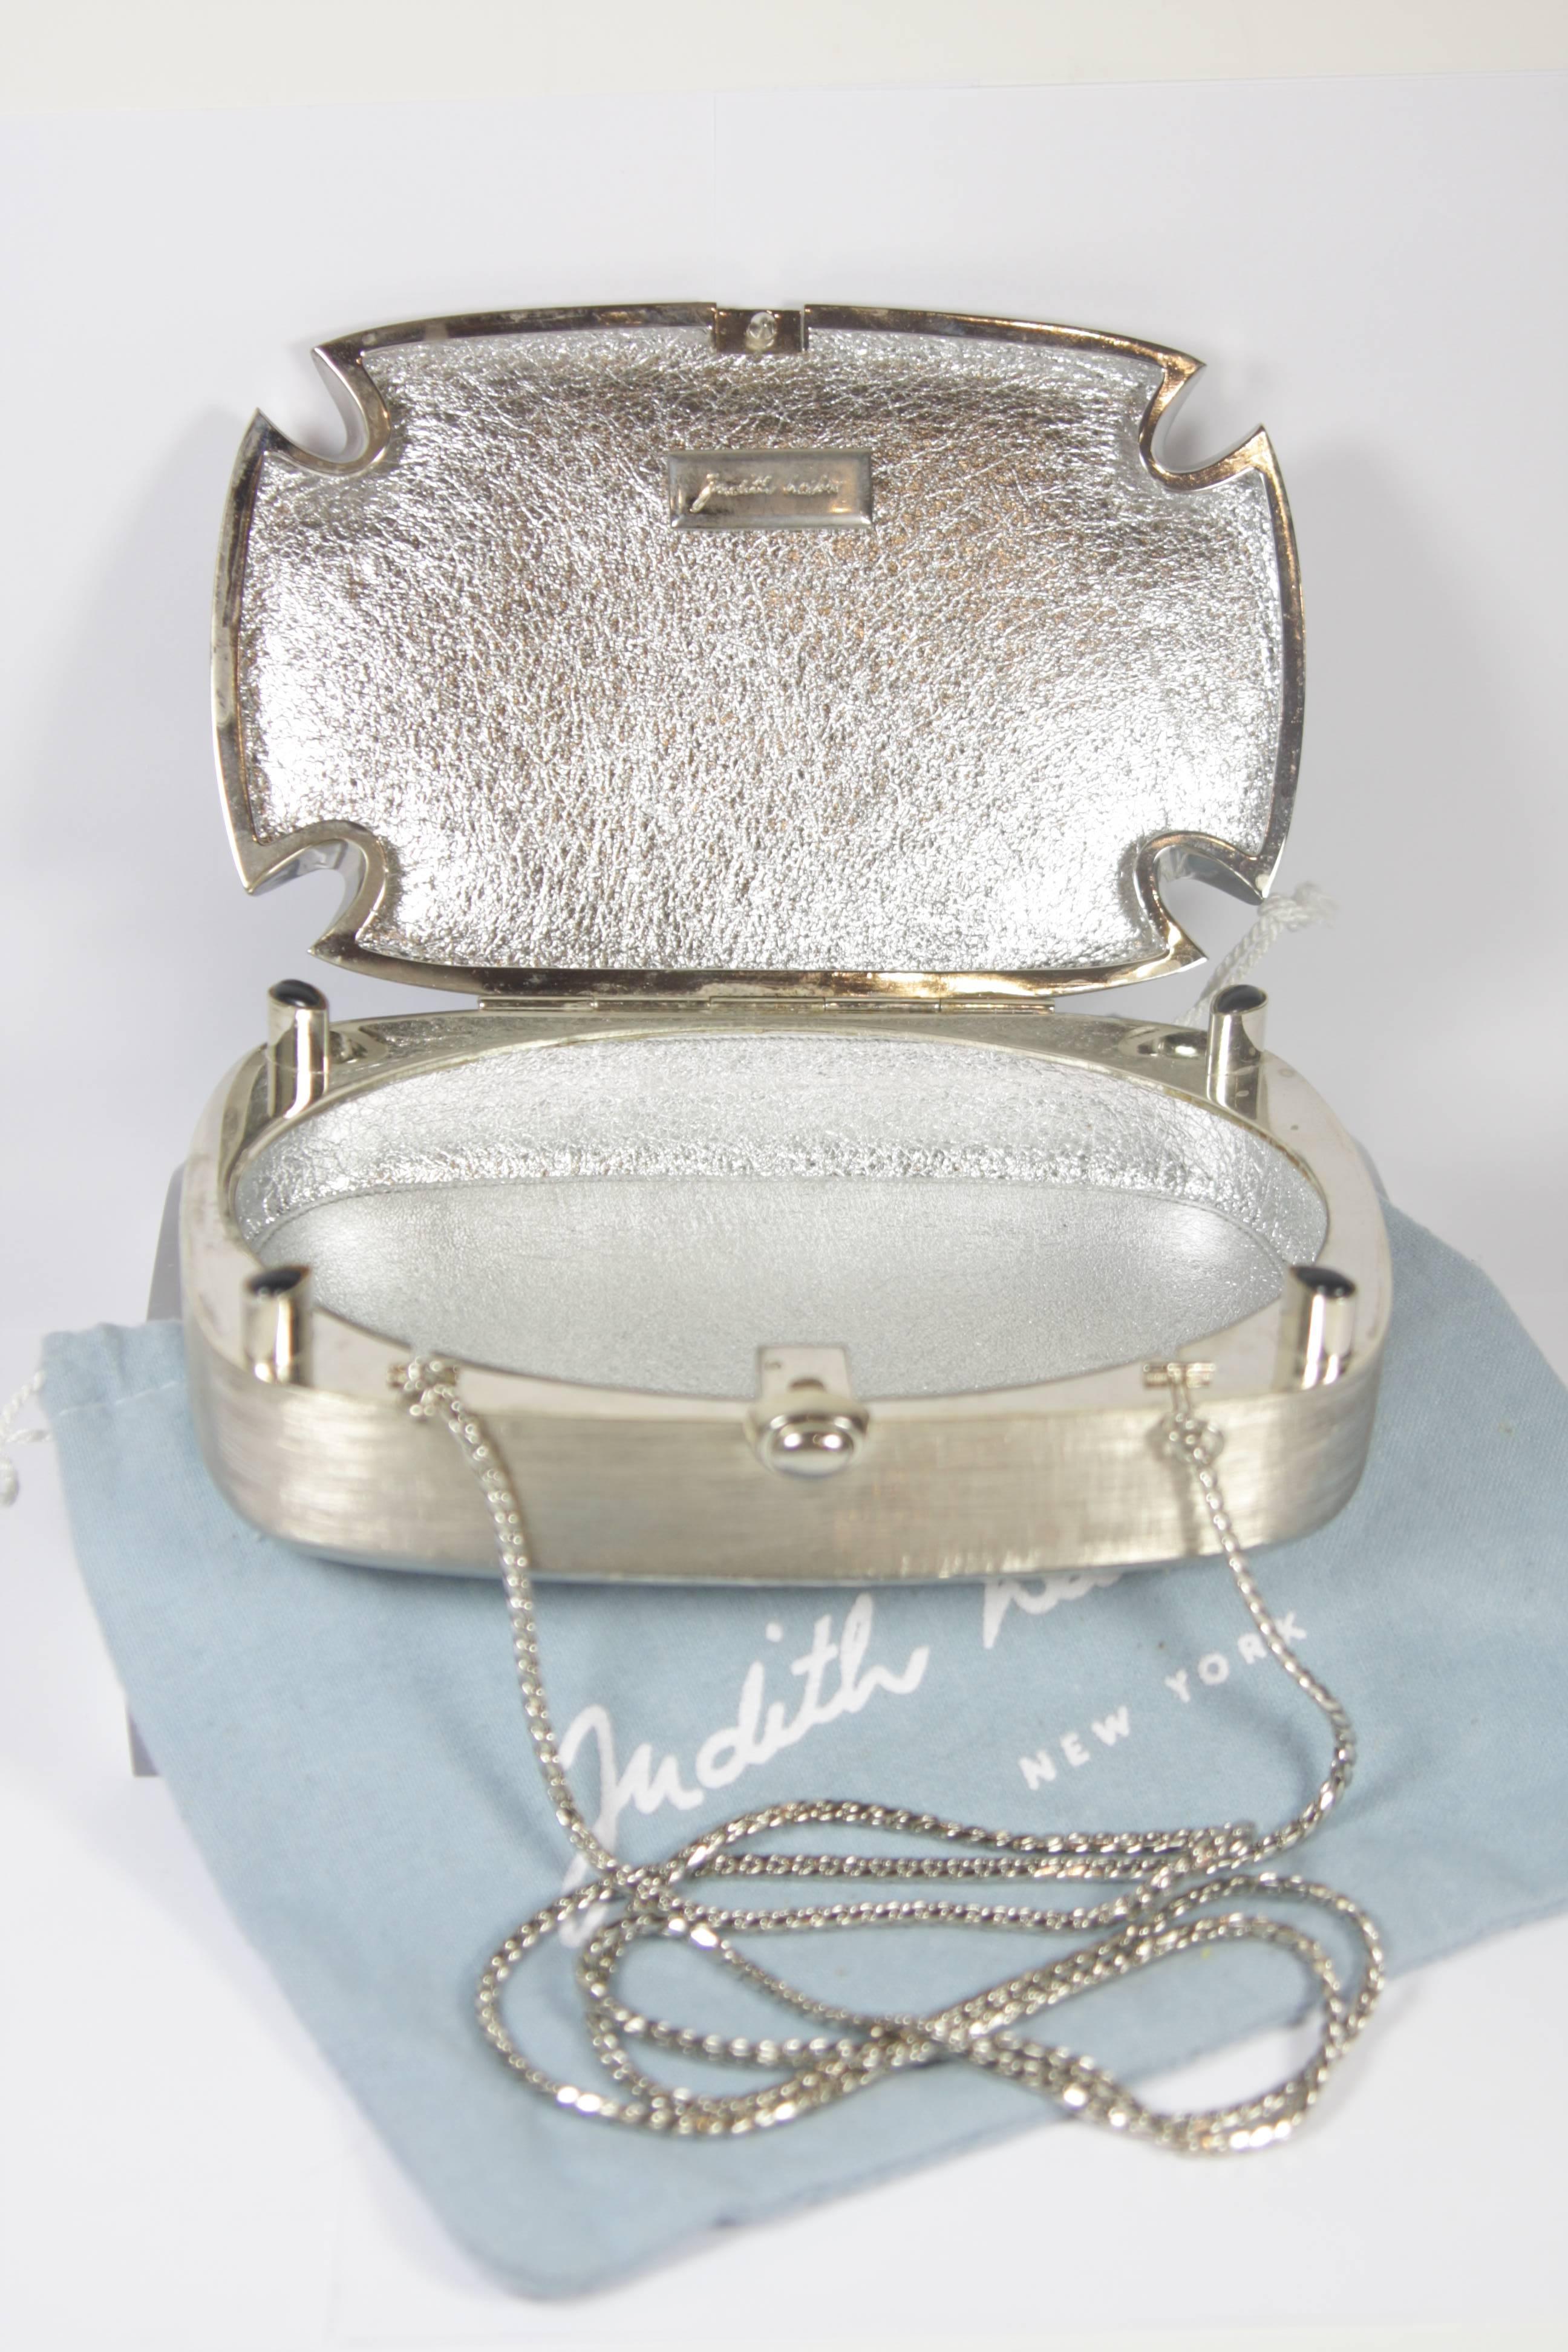  JUDITH LEIBER Brushed Metal Evening Purse with Stone Details Optional Strap For Sale 4